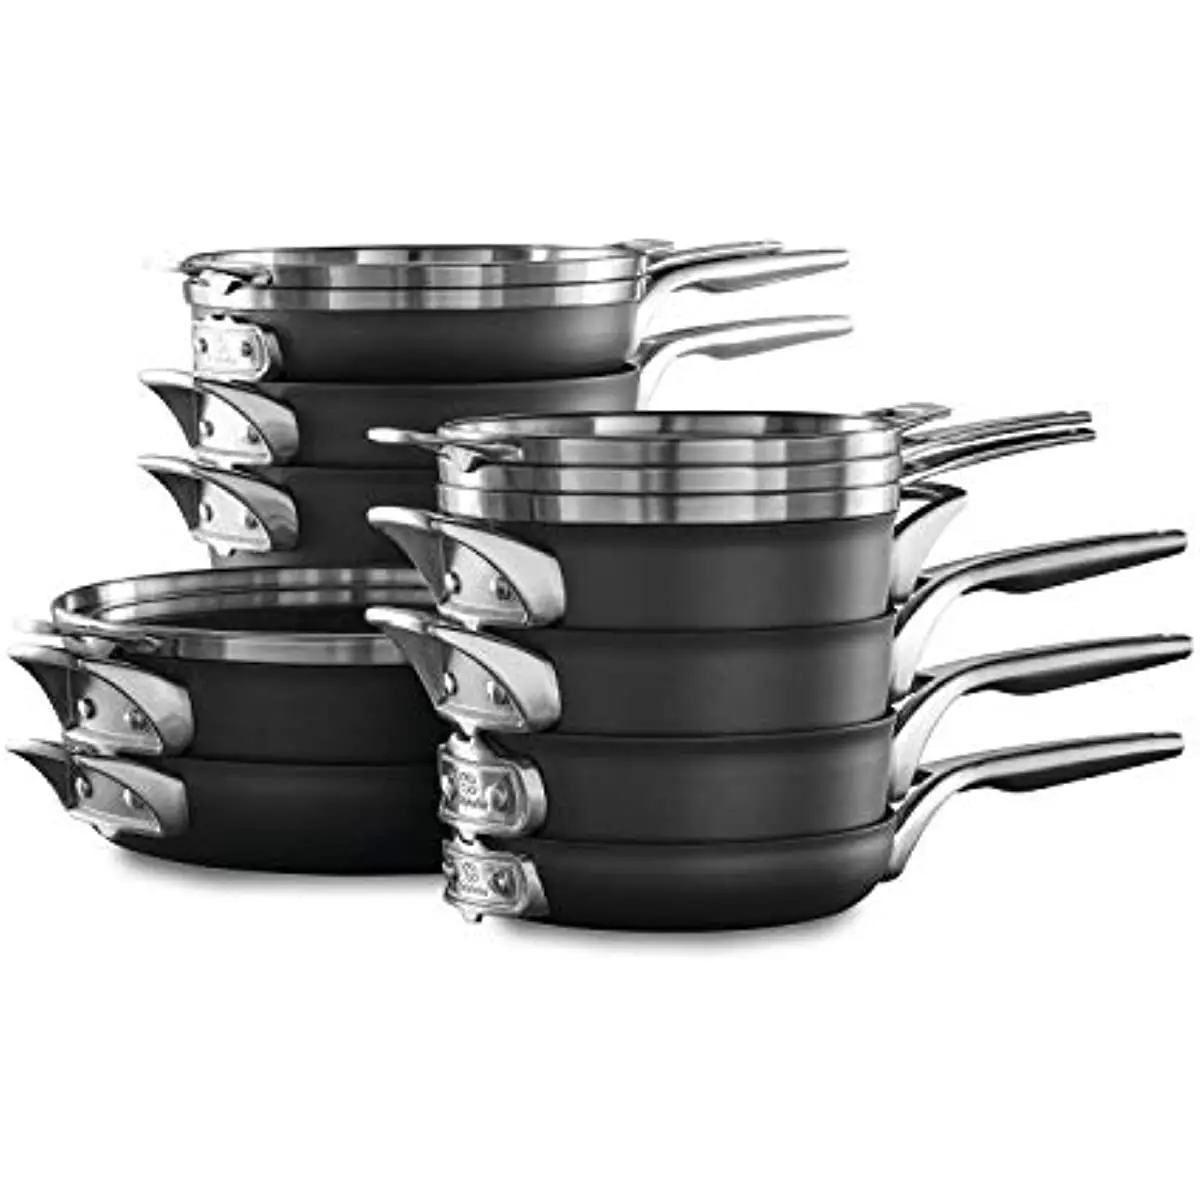 https://ae01.alicdn.com/kf/S2a714fedc60e4c4e859687ea86bdce73h/Calphalon-15-Piece-Pots-Pans-Set-Stackable-Nonstick-Kitchen-Cookware-Stay-Cool-Stainless-Steel-Hles-Black.jpg